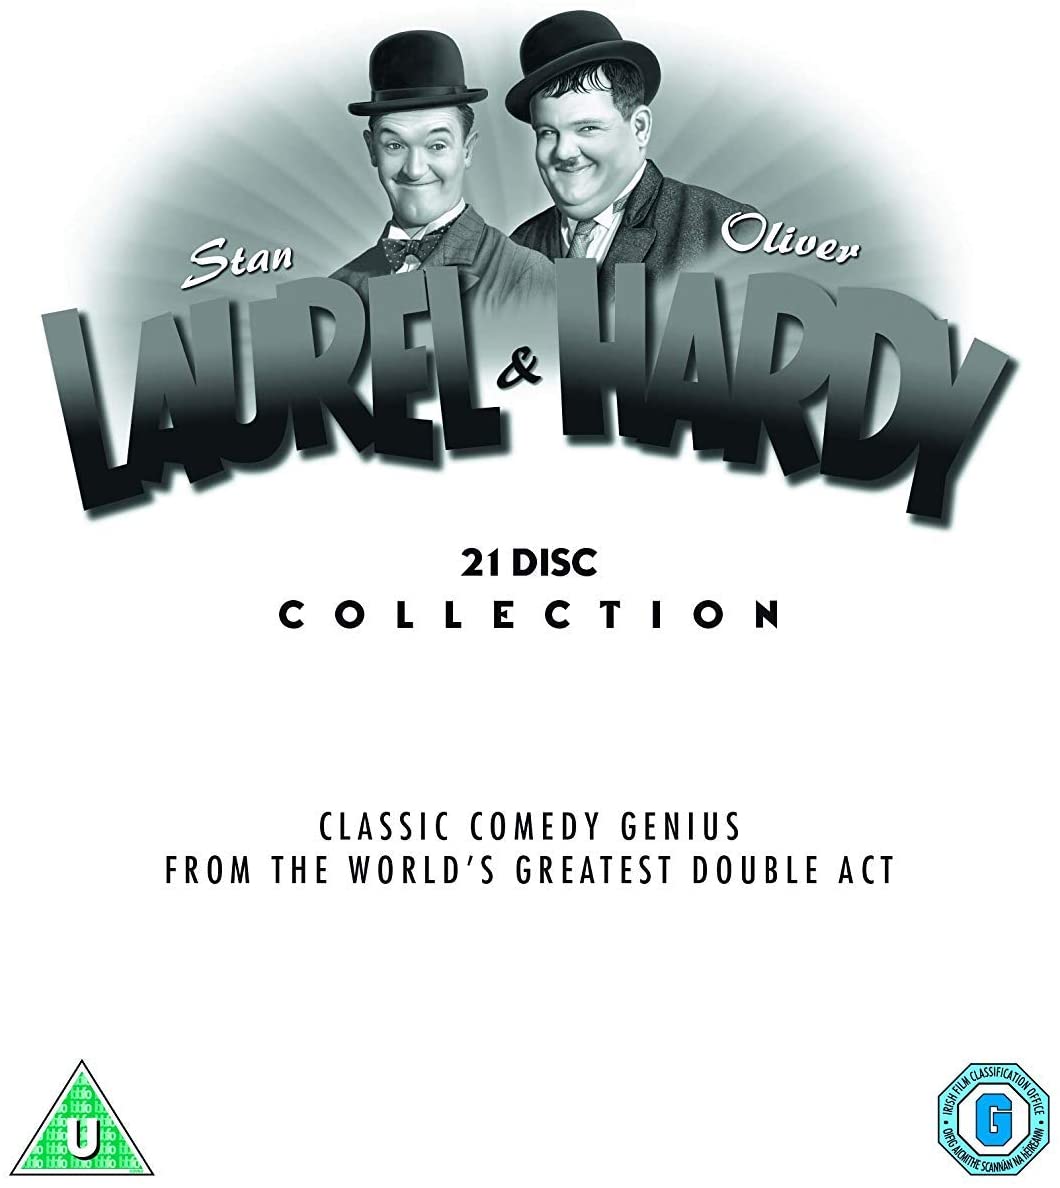 Laurel & Hardy: The Collection - Comedy [DVD]